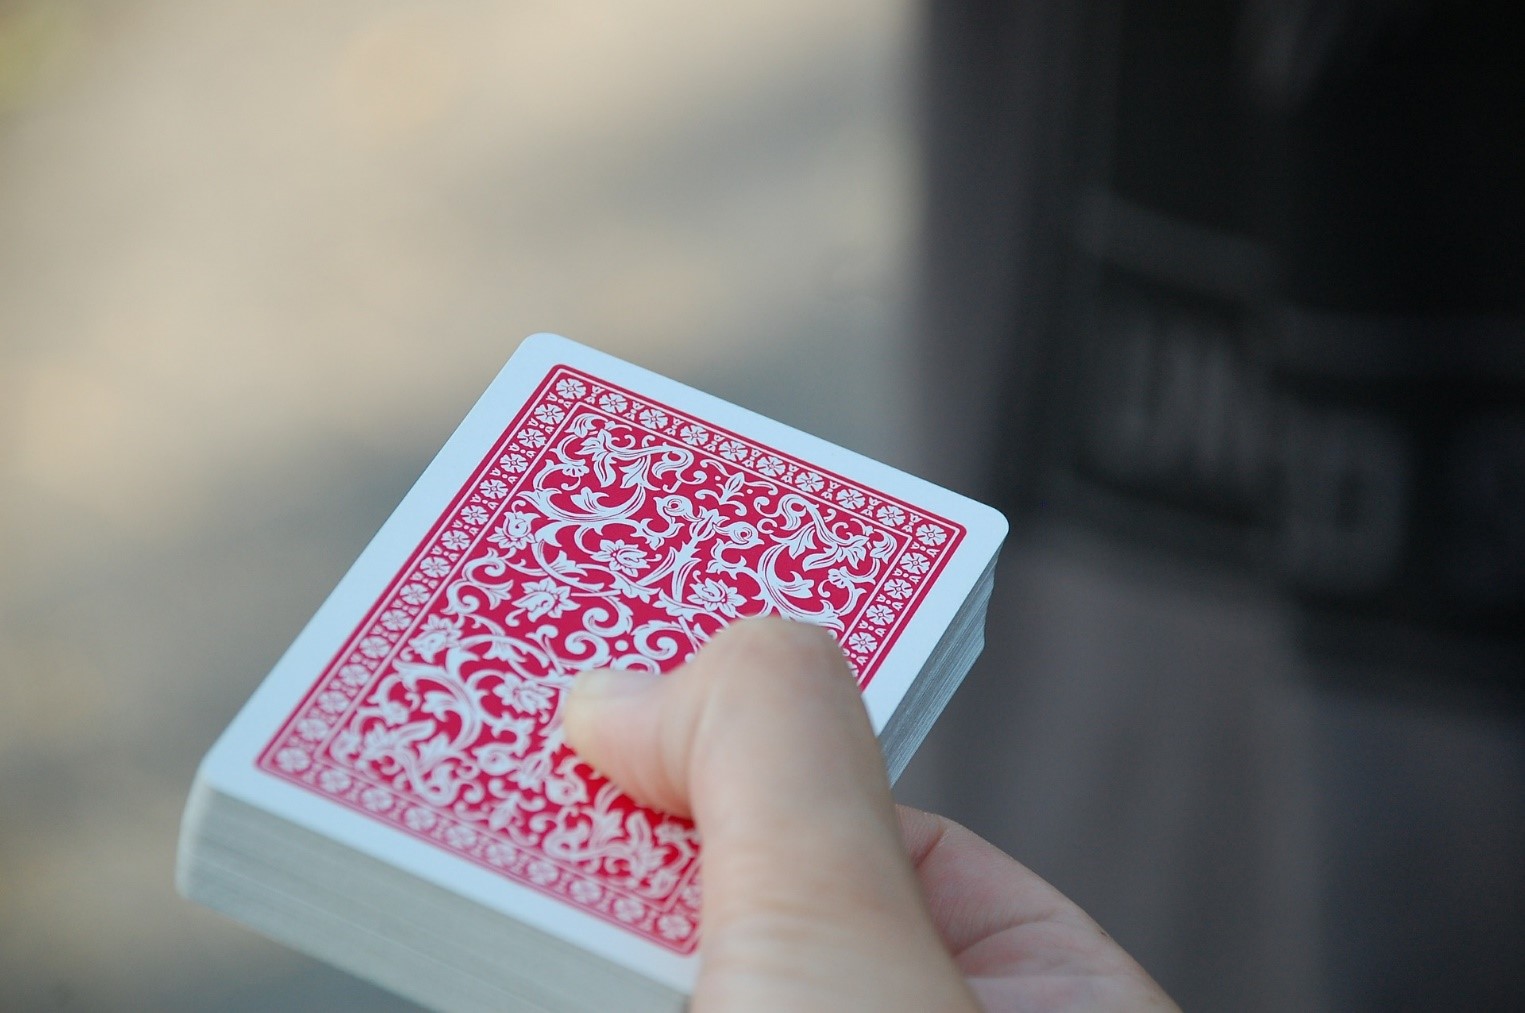 Deck of cards in a hand